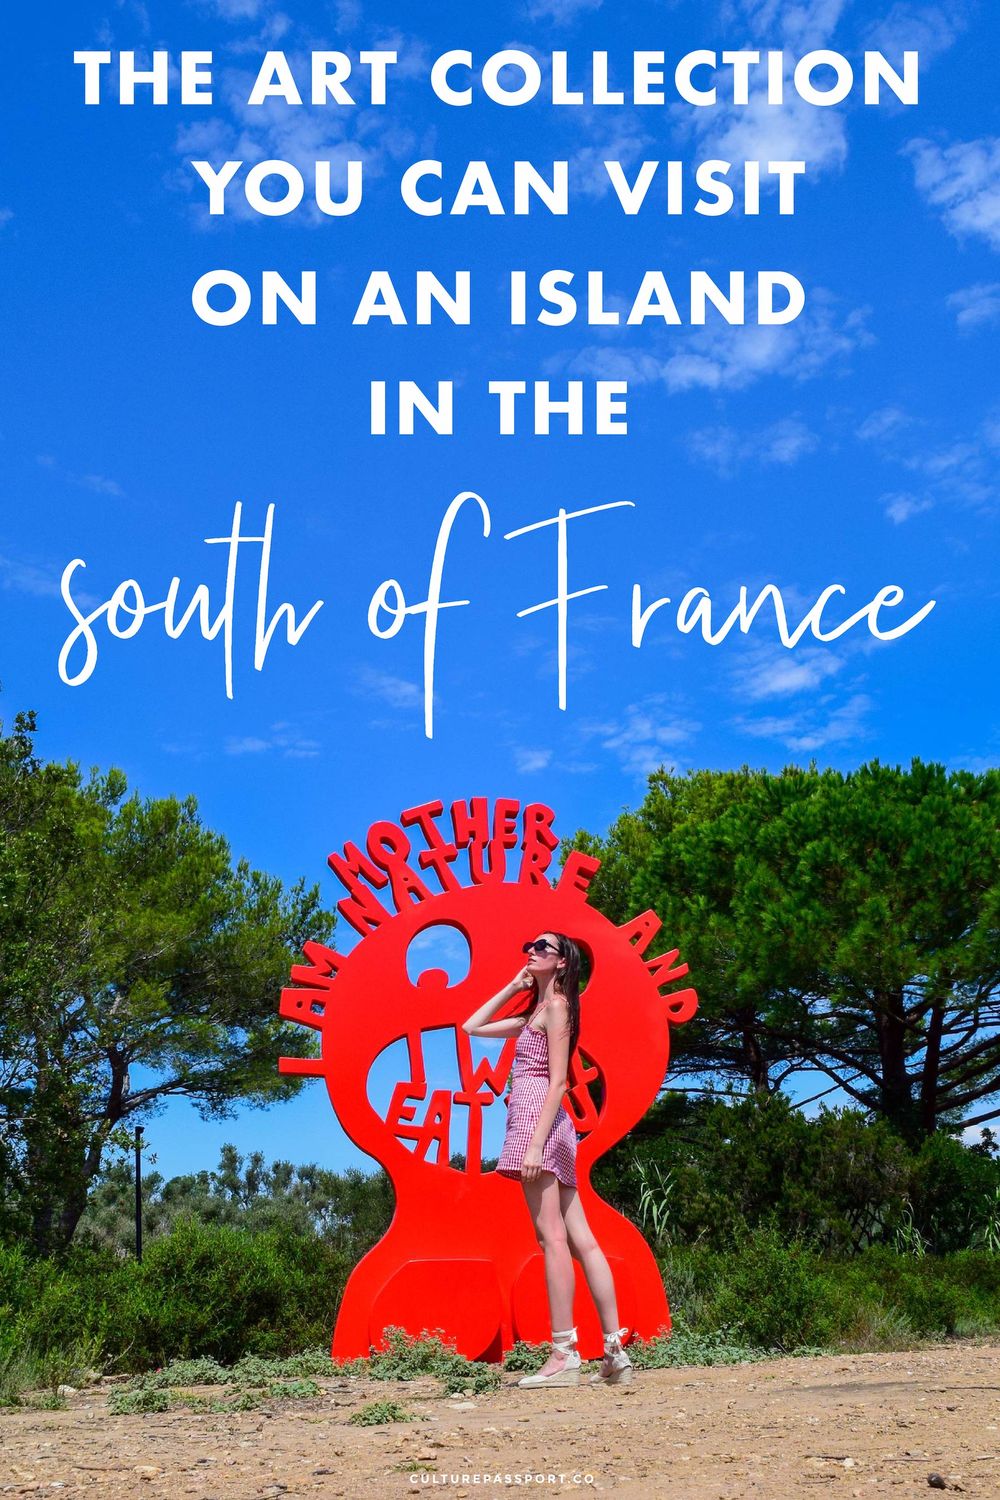 An Art Collection you can visit on an Island in the South Of France